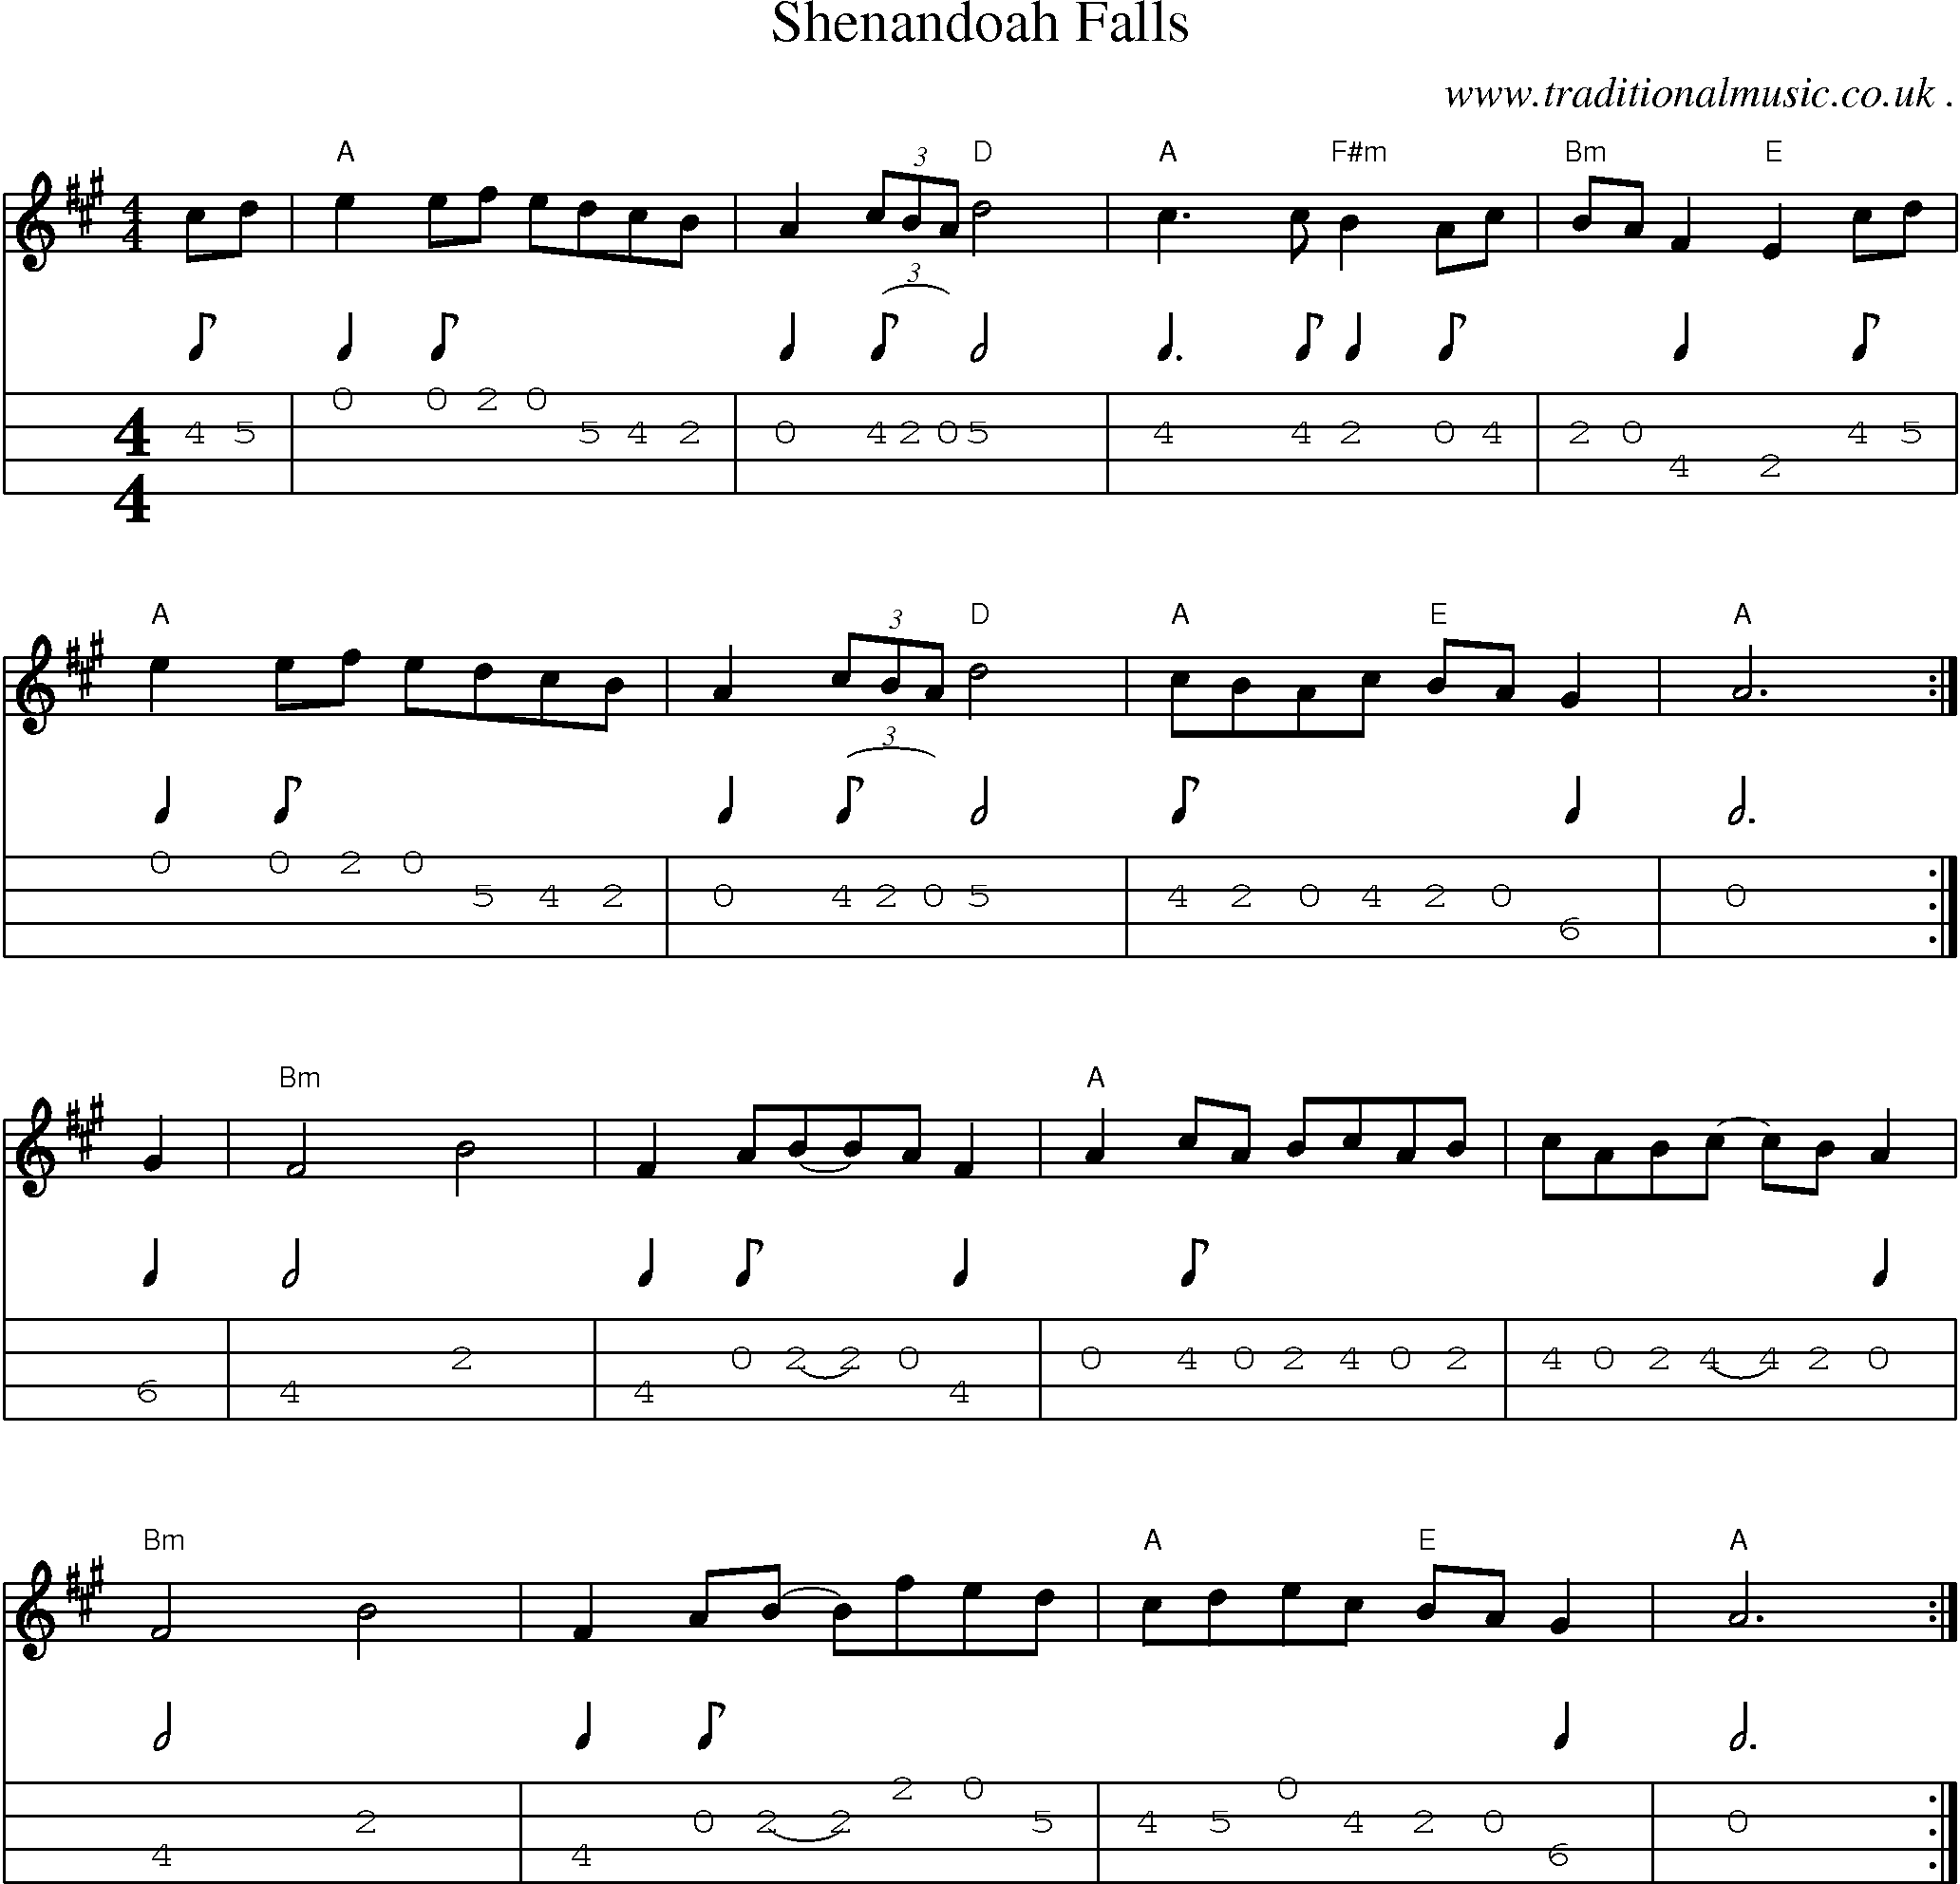 Music Score and Guitar Tabs for Shenandoah Falls